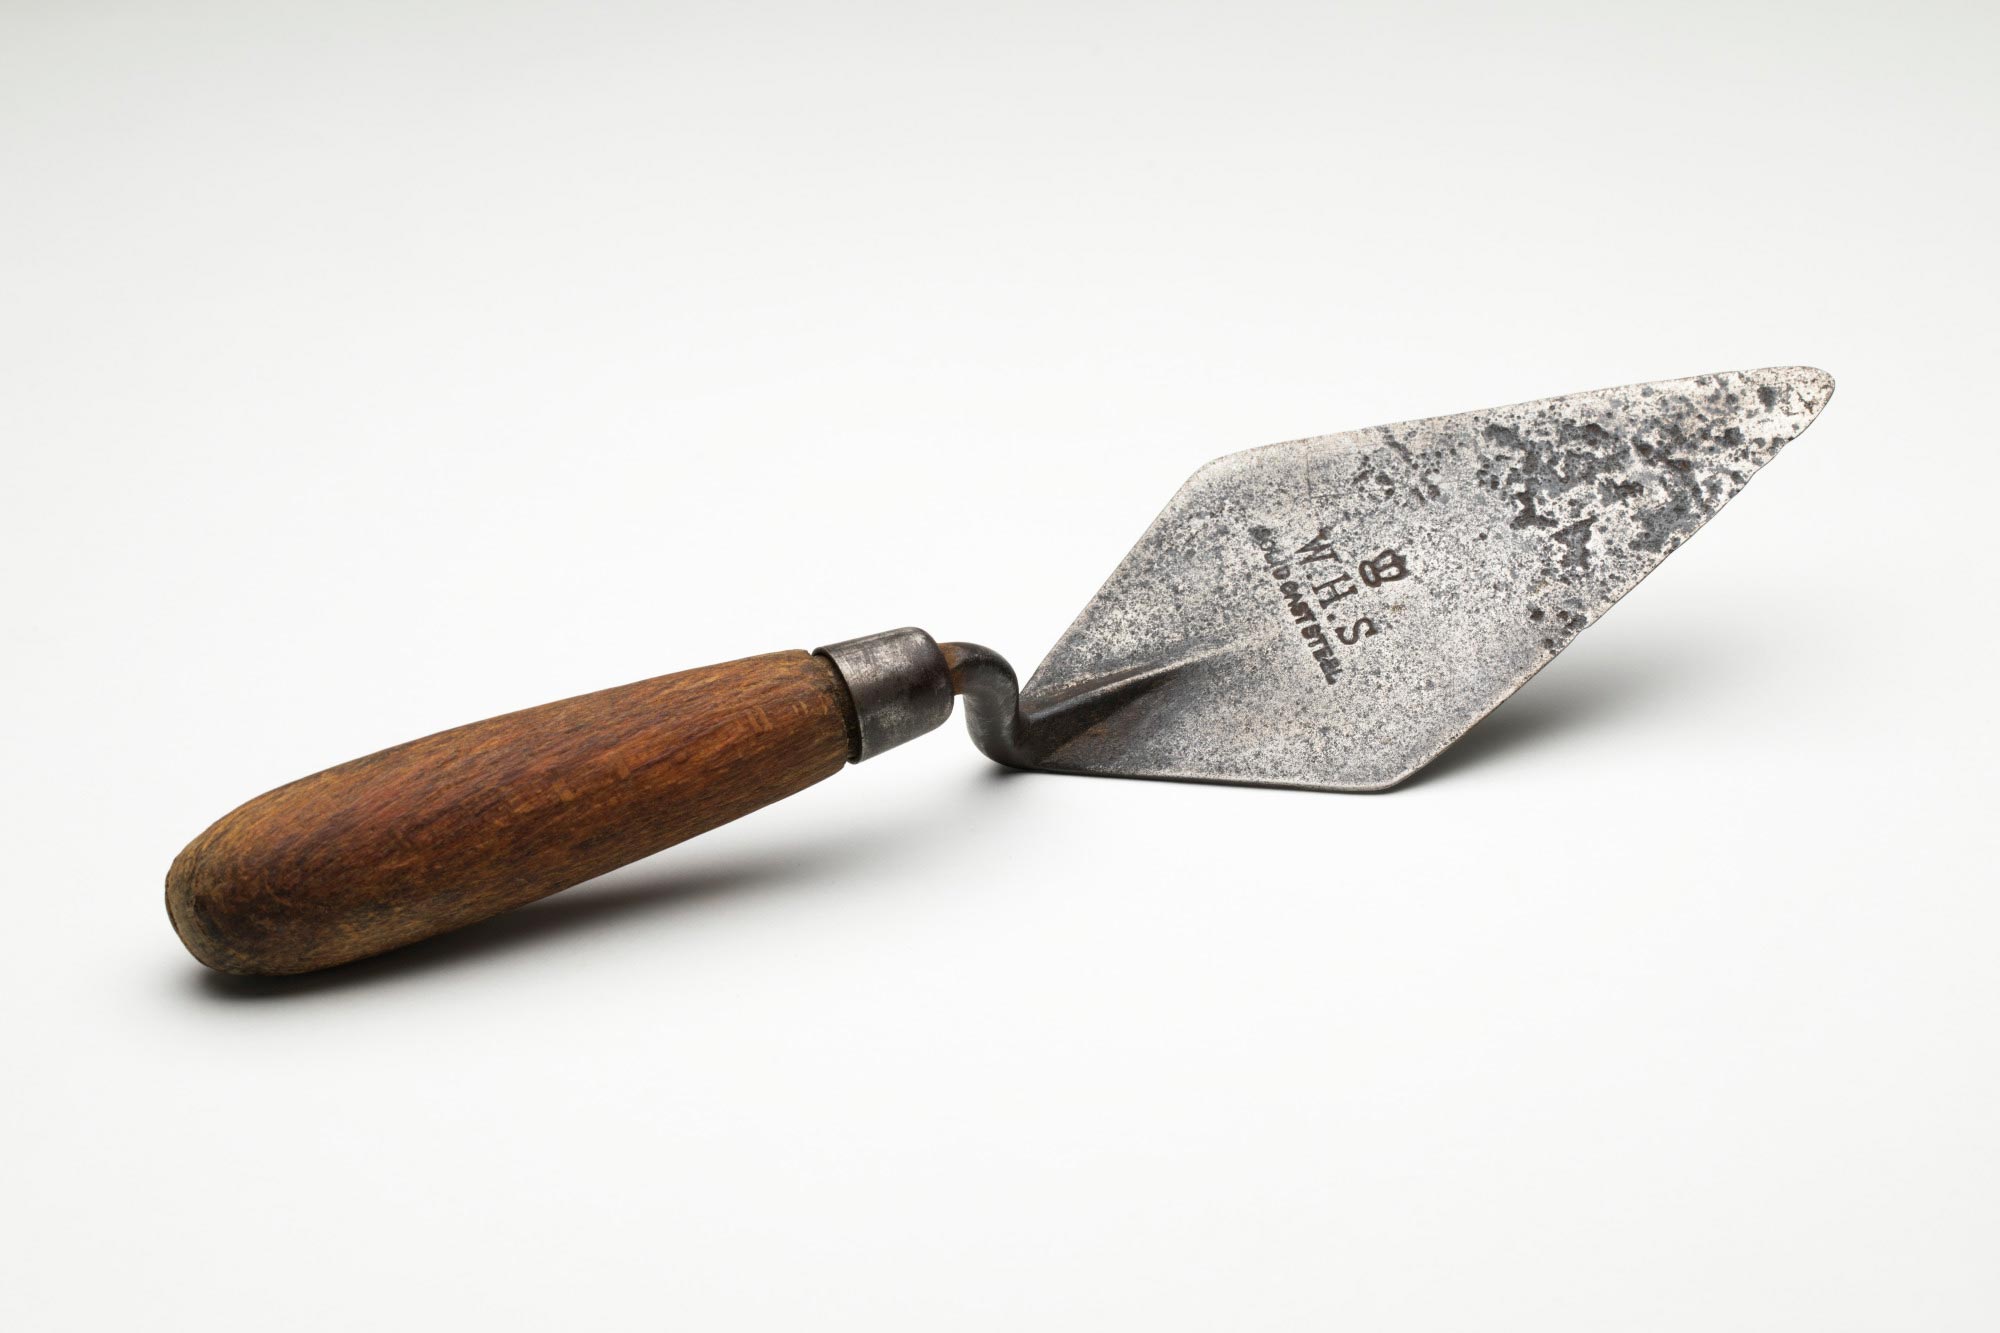 Secondary trowel used by archaeologist Professor John Mulvaney.